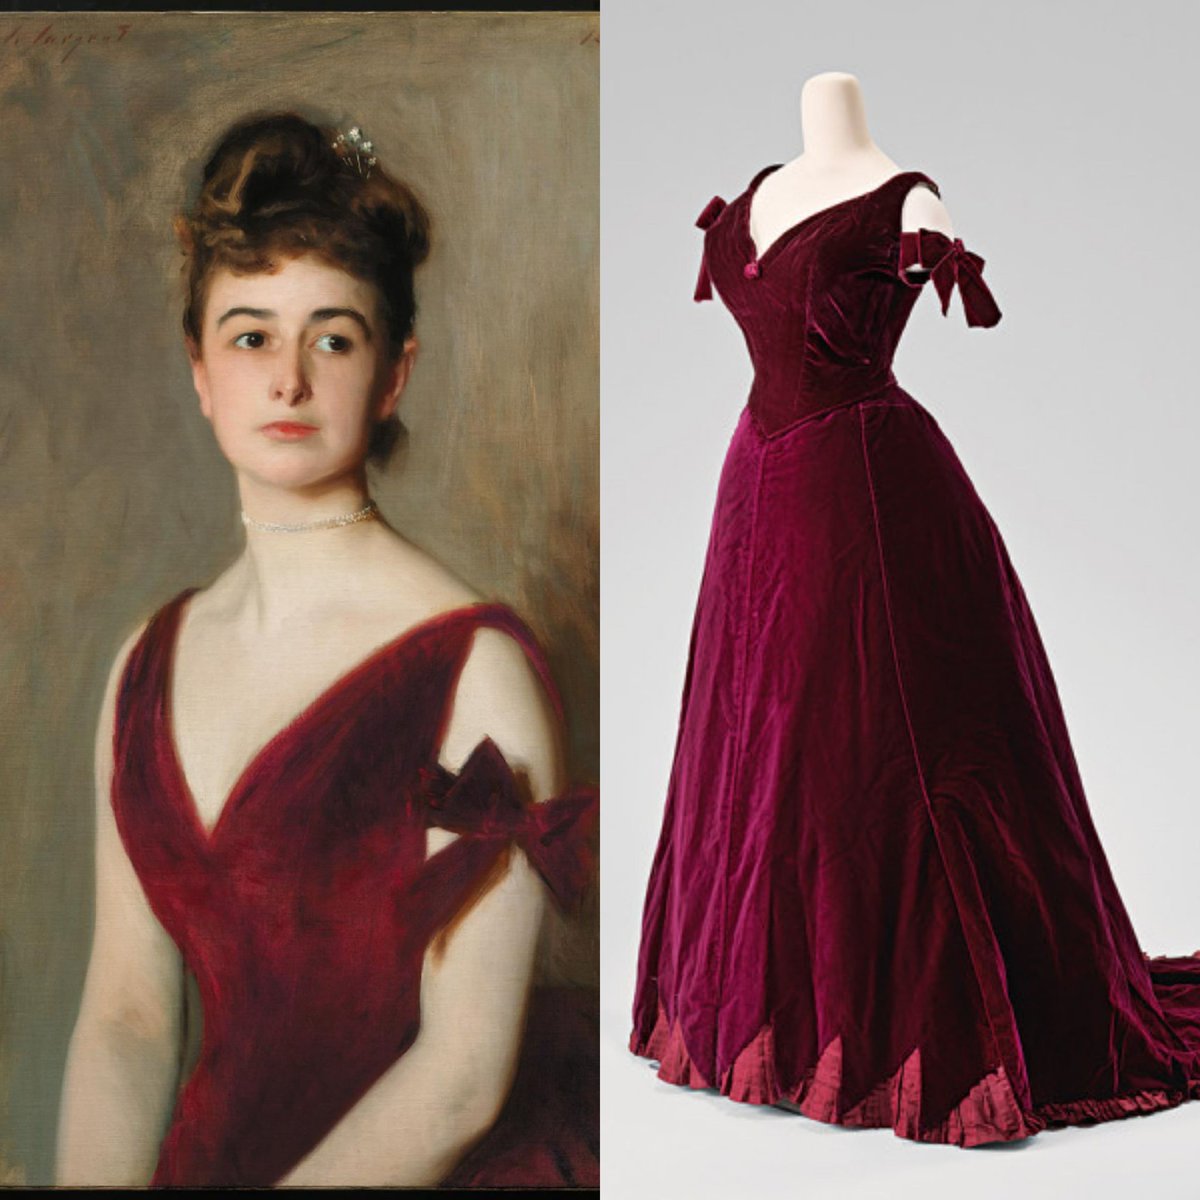 The opening of Sargent and Fashion at the @Tate is only 2 weeks away! Sargent painted this 1887 portrait of Mrs. Charles E. Inches (Louise Pomeroy) wearing a red silk velvet evening dress that was later altered in 1902. Painting and dress @mfaboston collection #SargentAndFashion